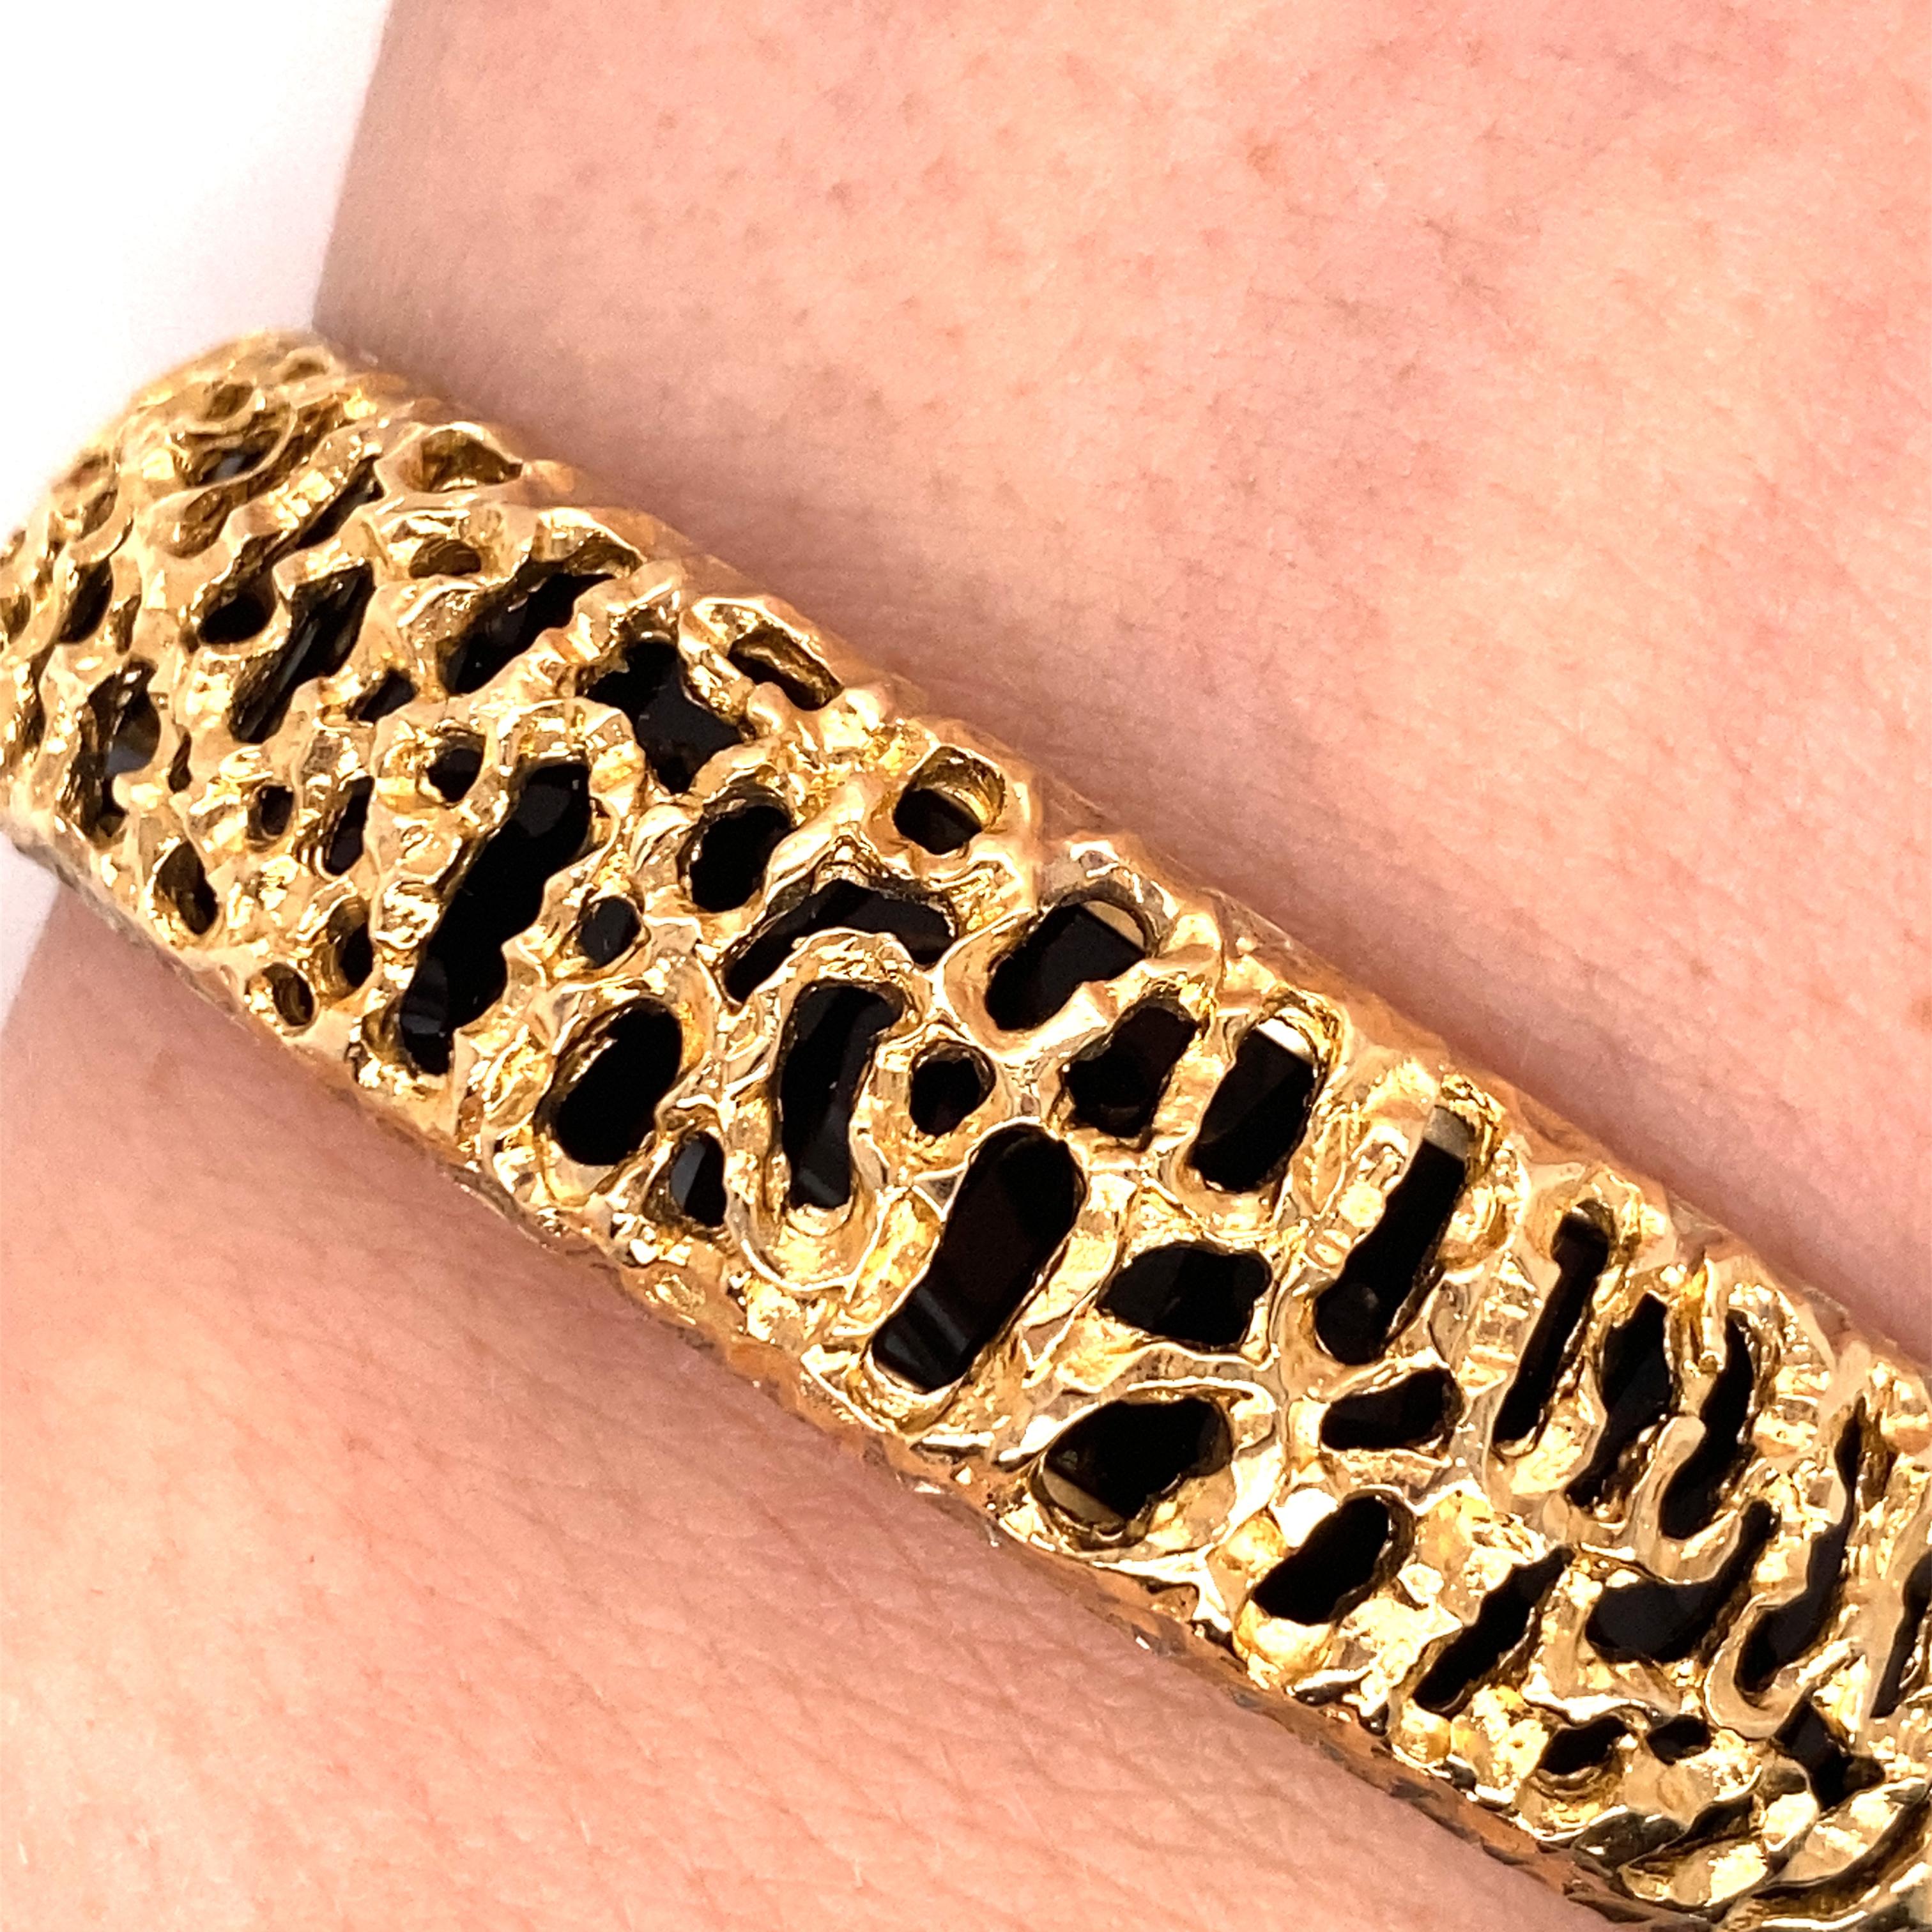 Vintage 1980's 14K Yellow Gold Bangle Bracelet with Filigree and Onyx - The bracelet has onyx inside a beautiful filigree design. The width of the bangle is .65 inches. The inside diameter is 2 inches high by 2.35 inches wide. The inside is stamped